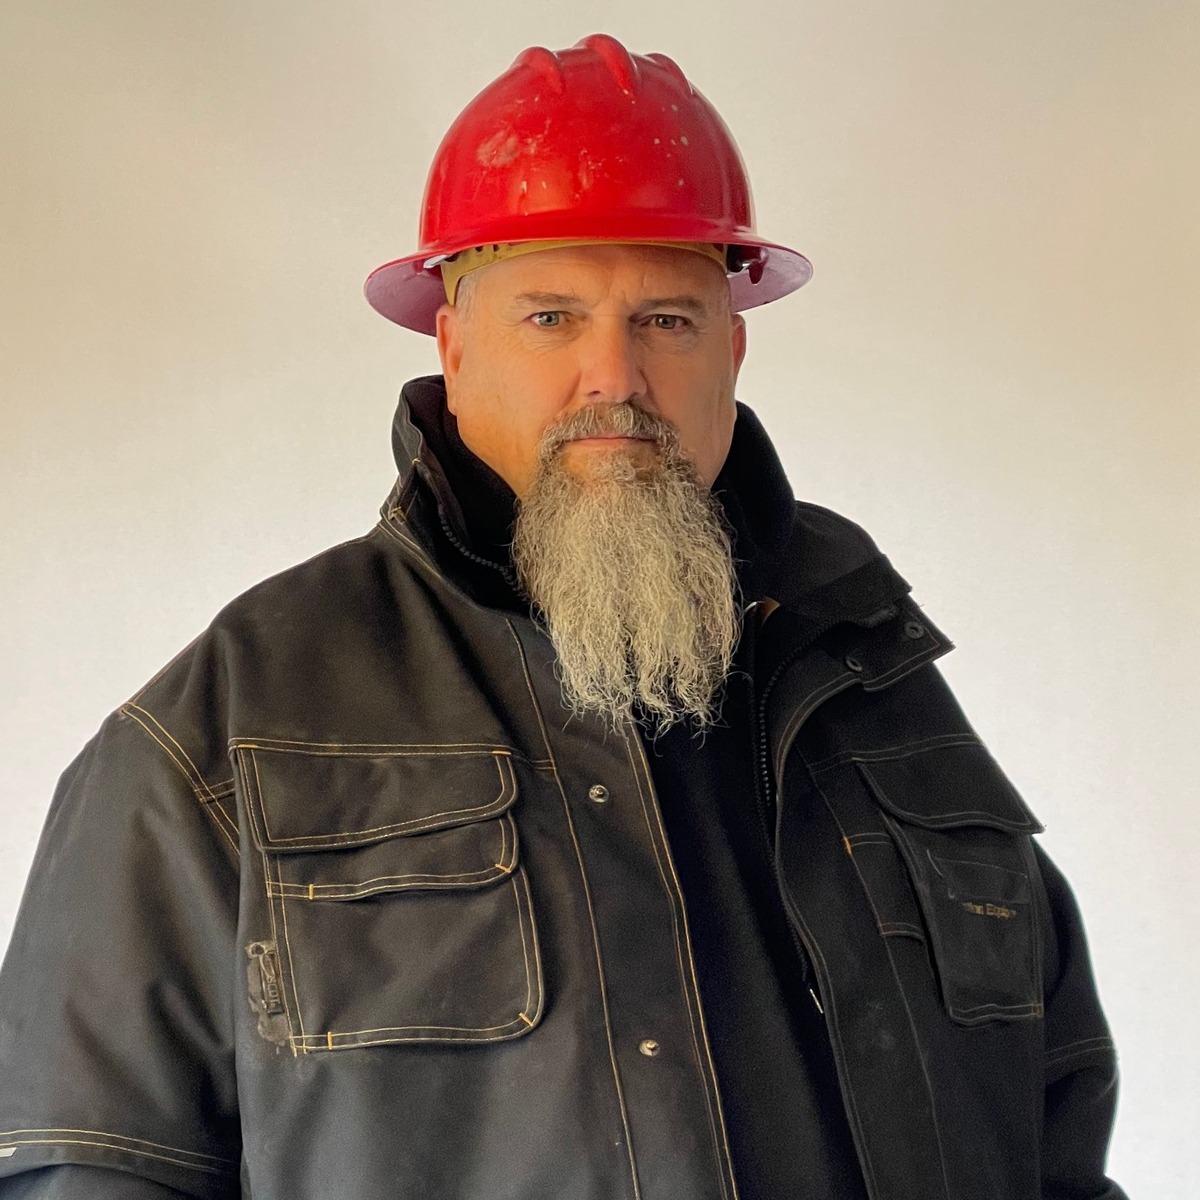 Todd Hoffman is an established gold miner and reality TV personality